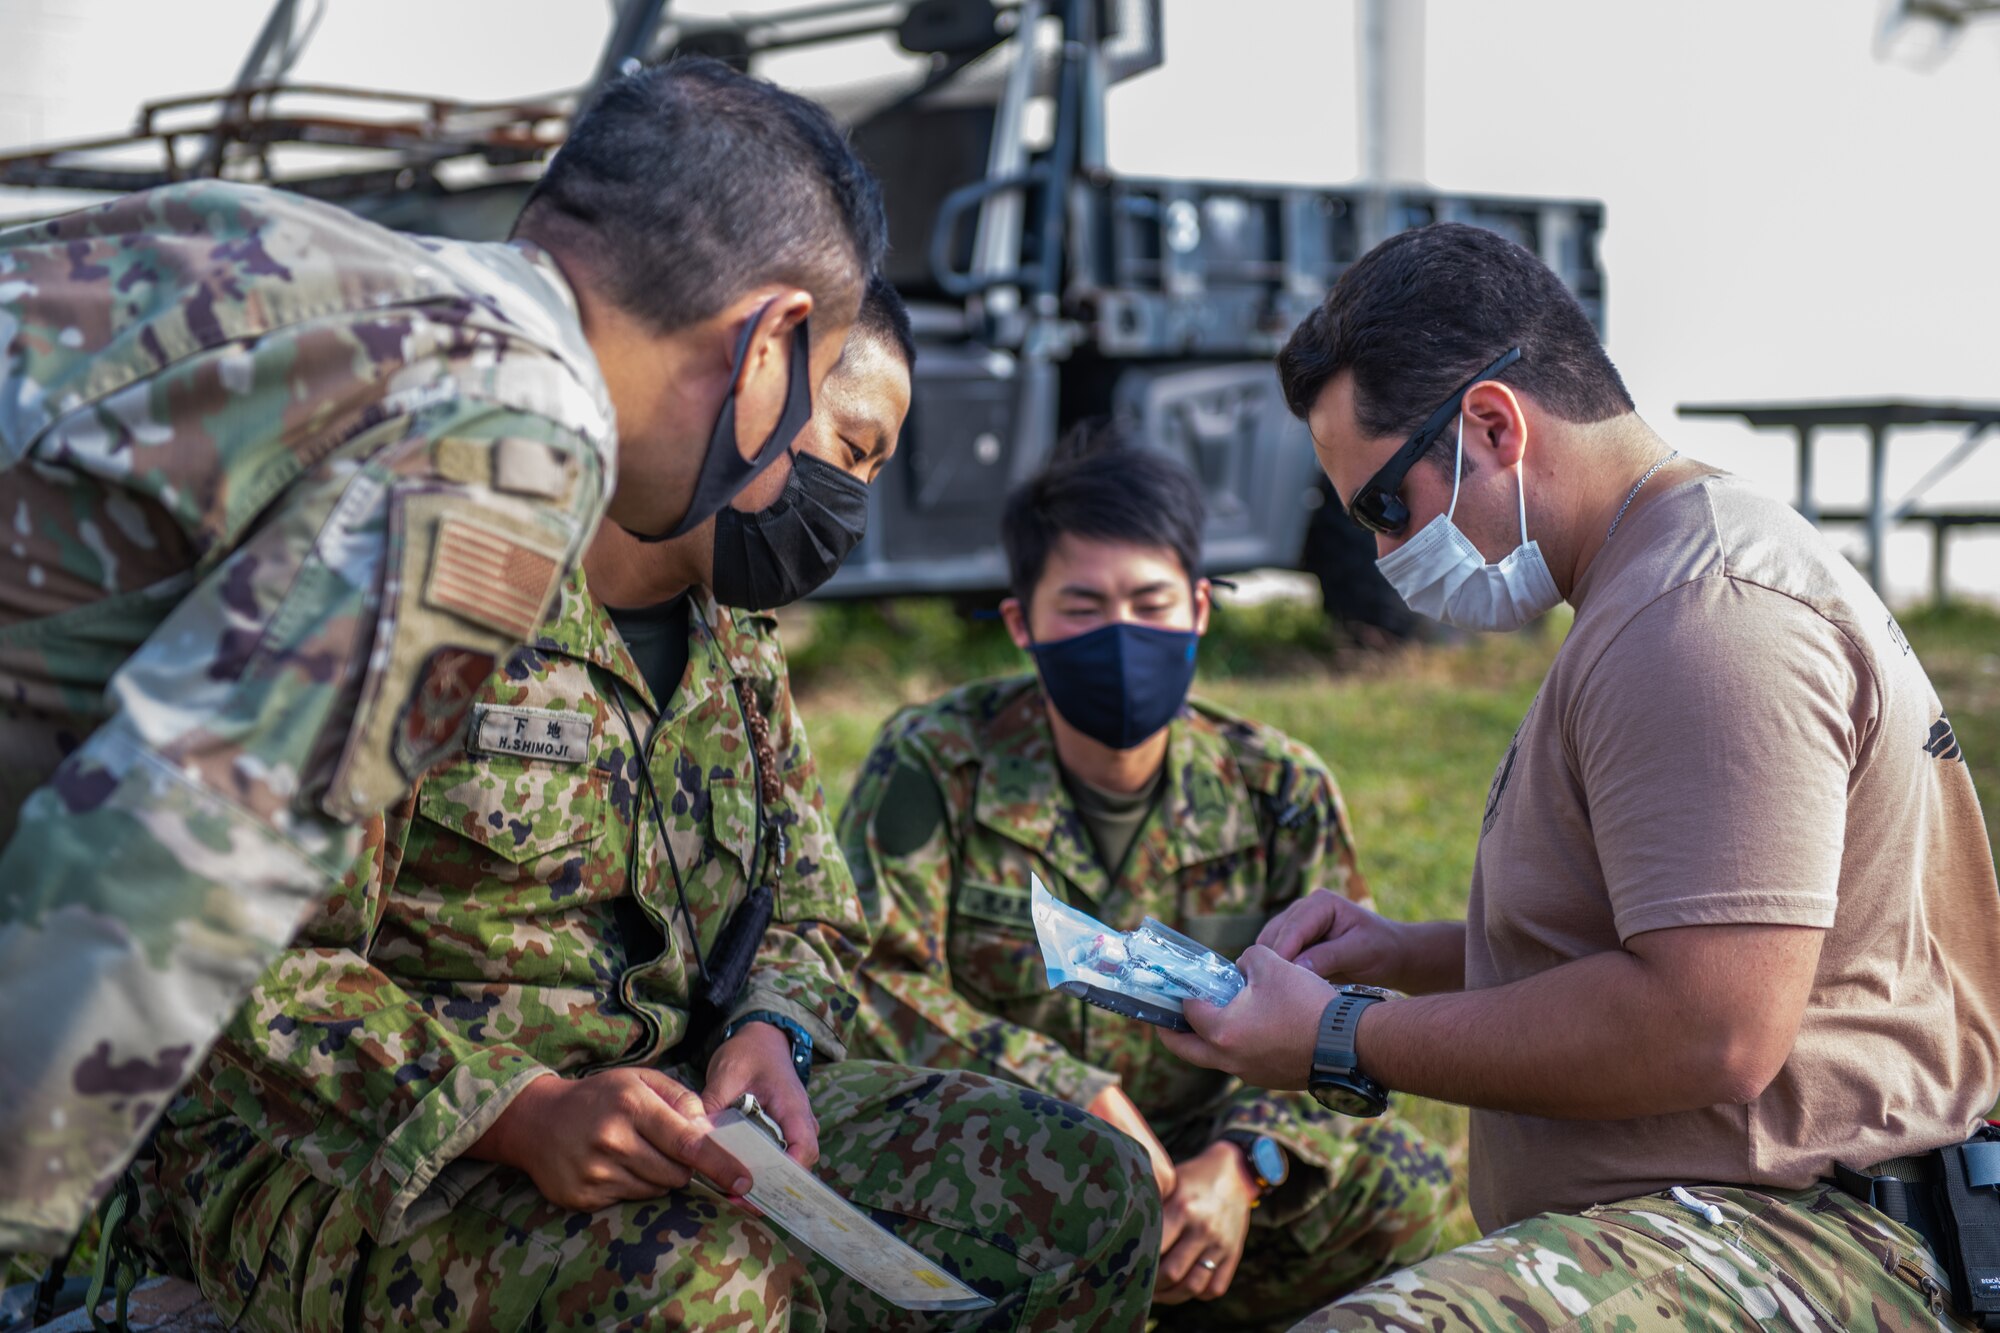 Two Japanese military members roleplaying patients are attended by two American military members